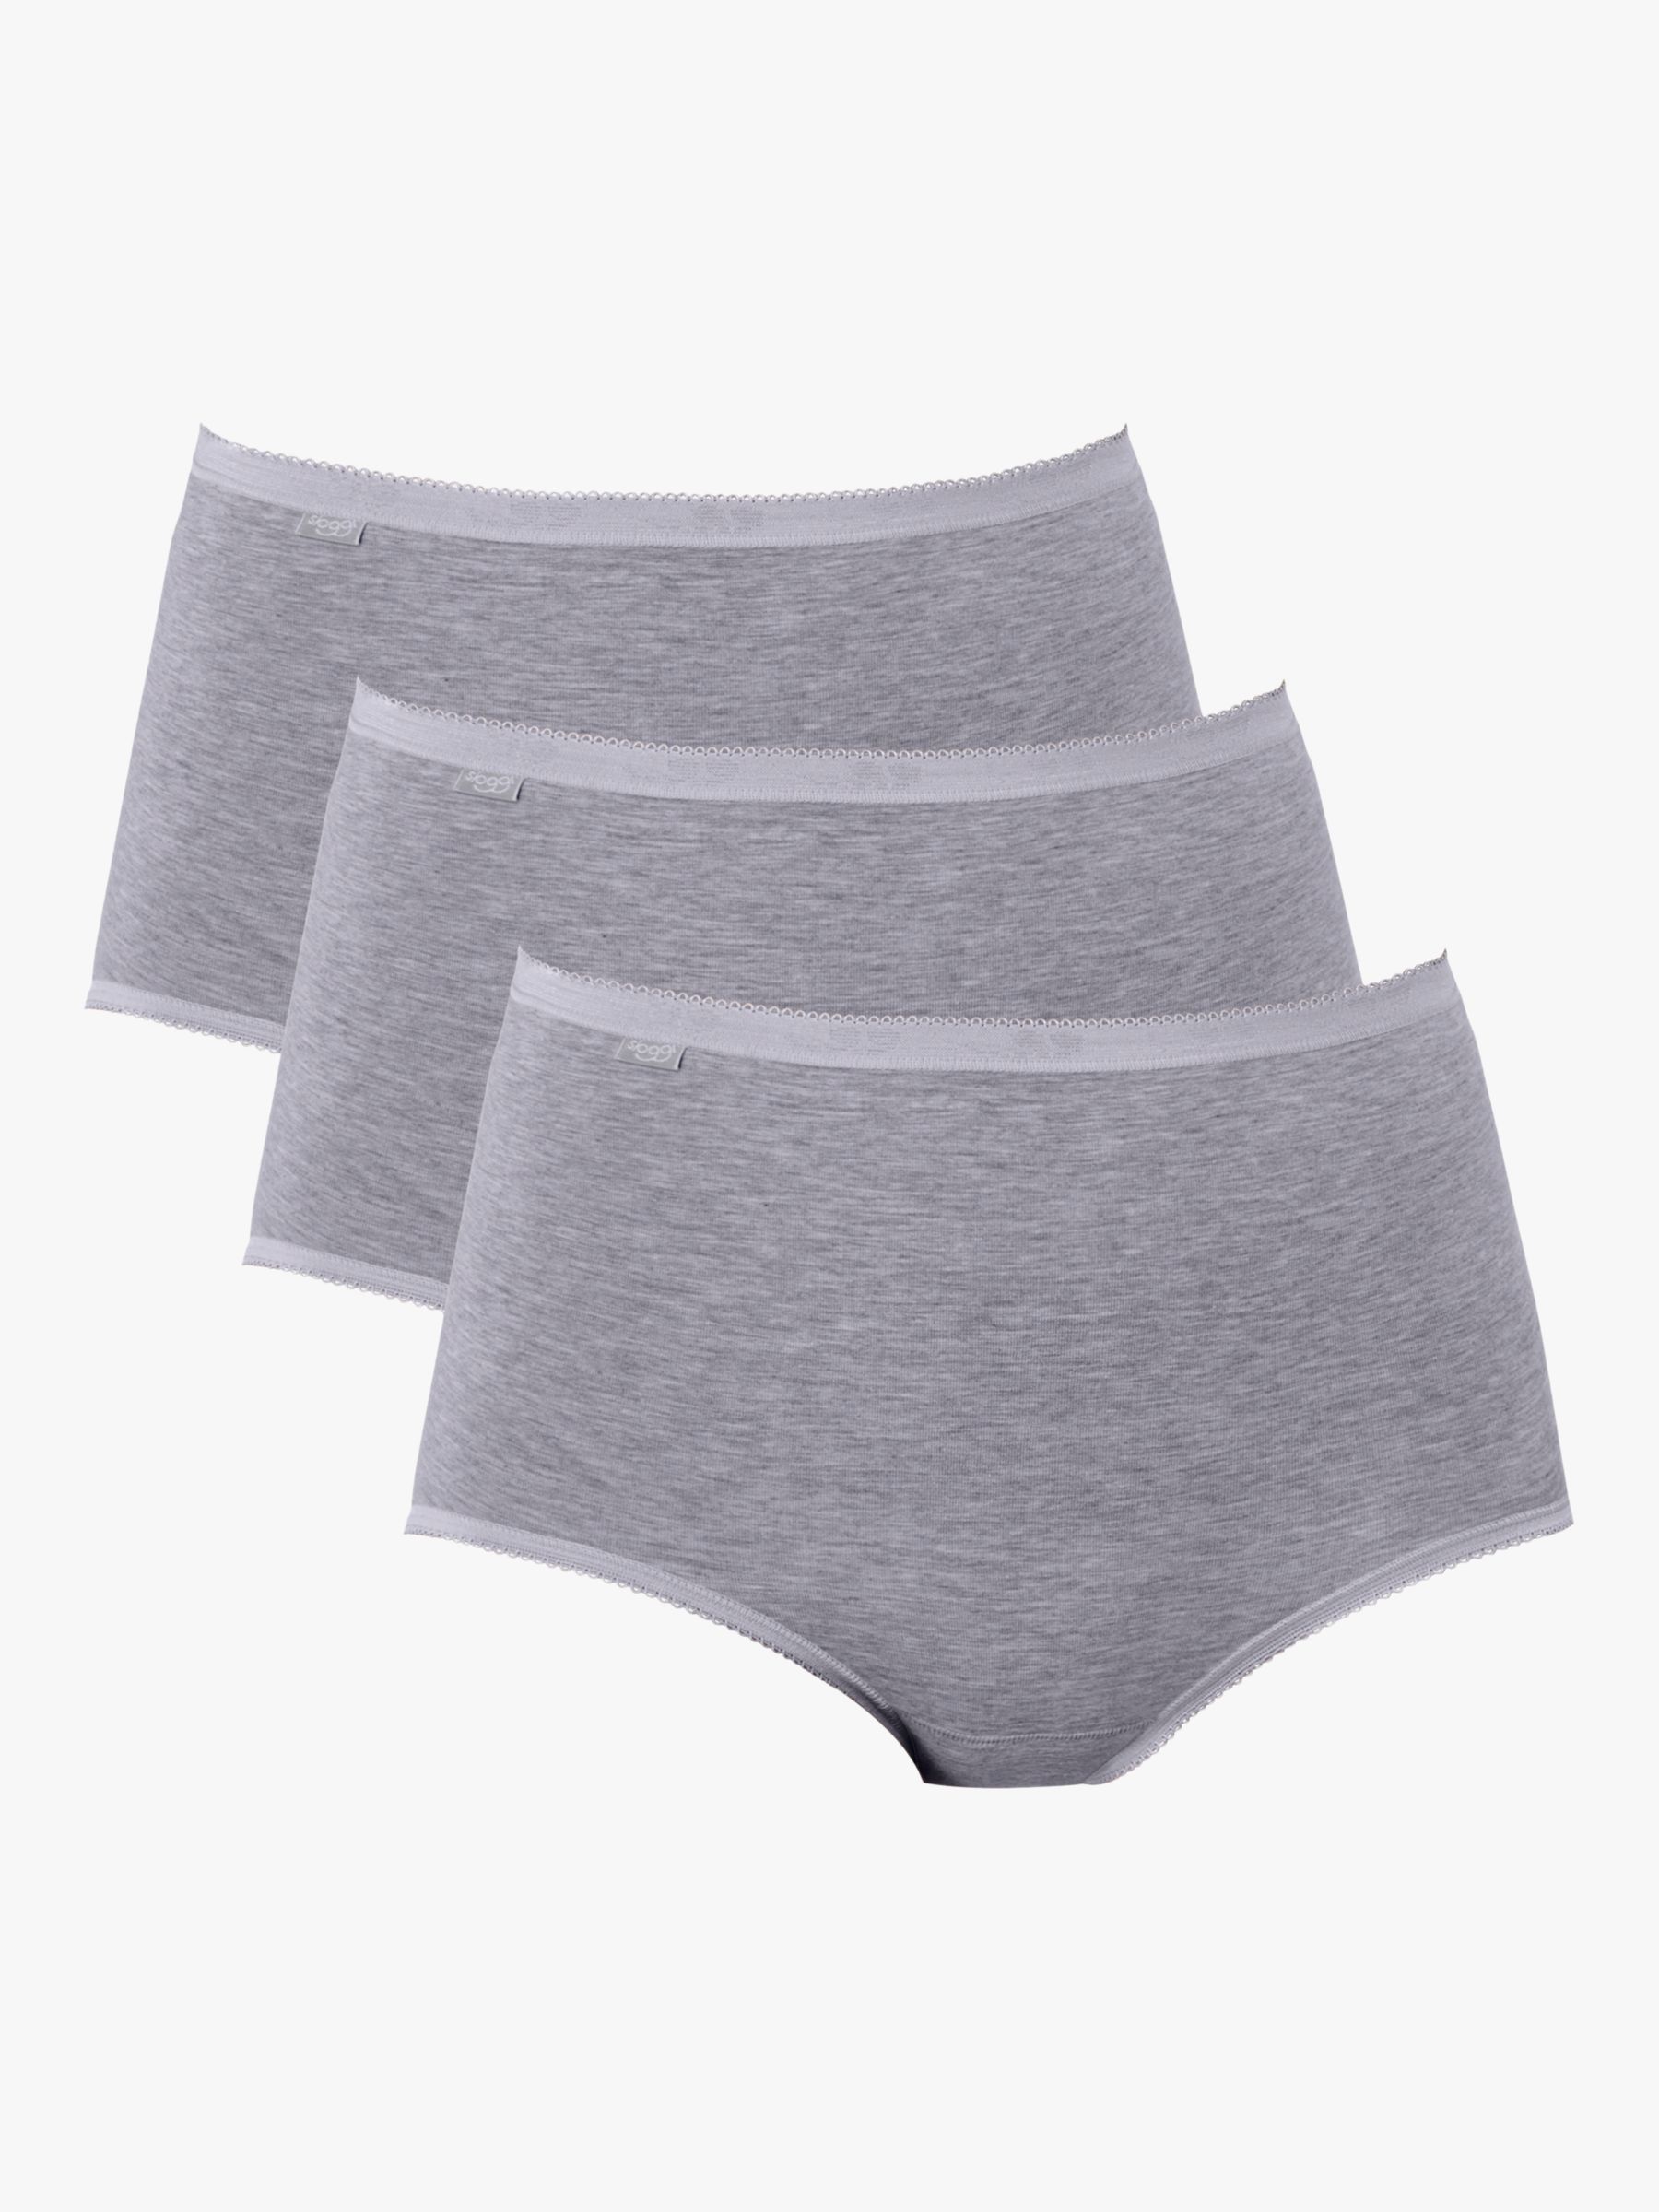 John Lewis ANYDAY Lace Trim Tanga Knickers, Pack of 3, Grey Marl/Cream at  John Lewis & Partners